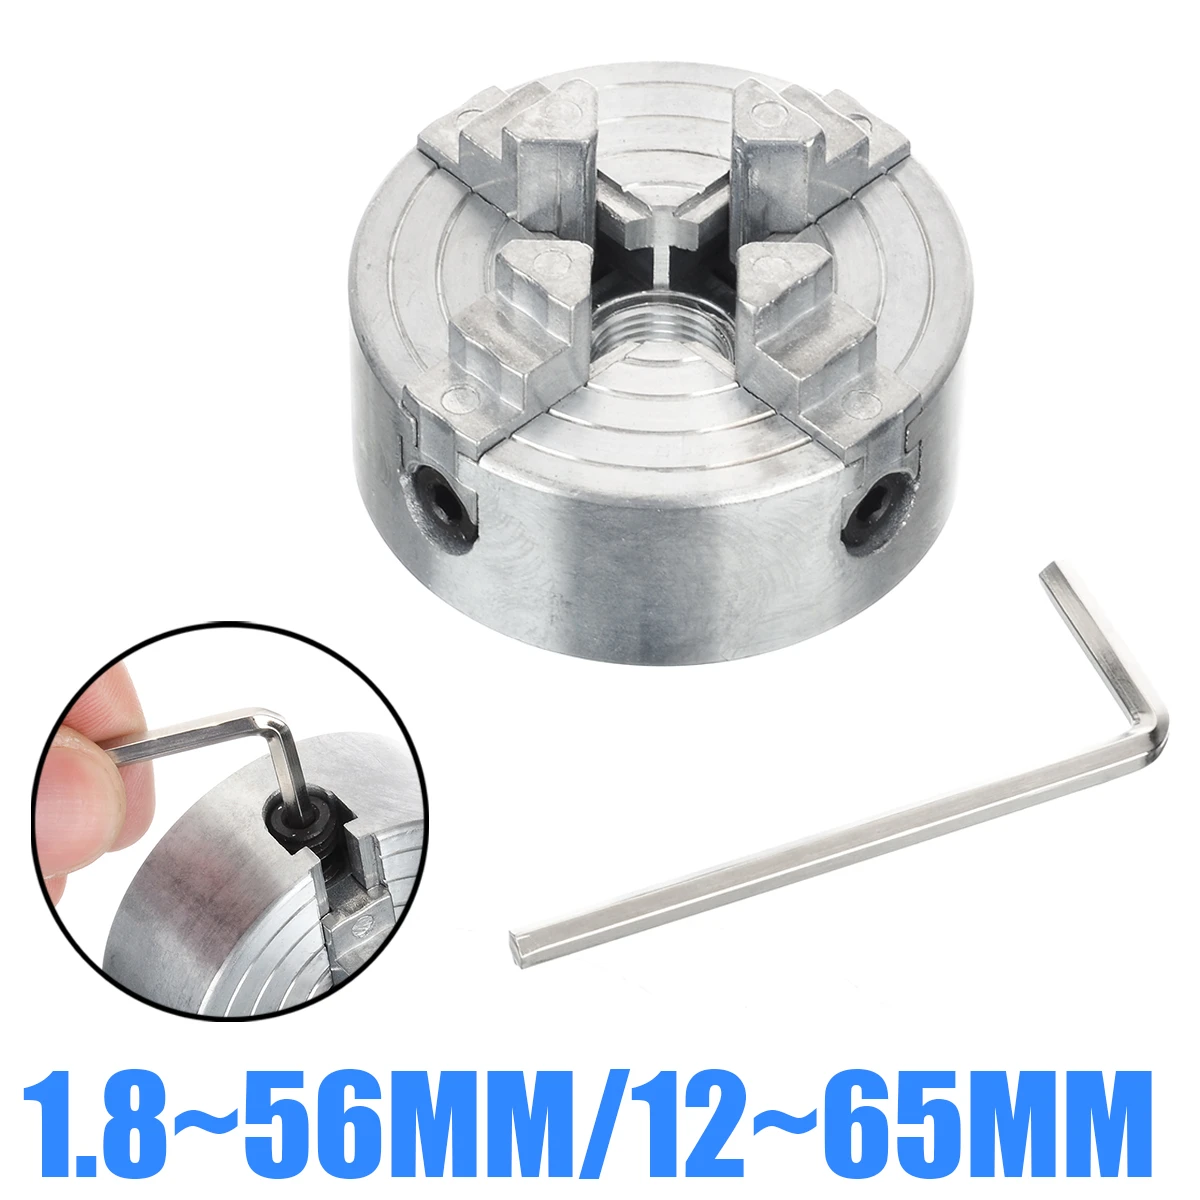 Clamping Diameter 1.8-56mm Industrial Woodworking For Mini Lathe three jaw chuck